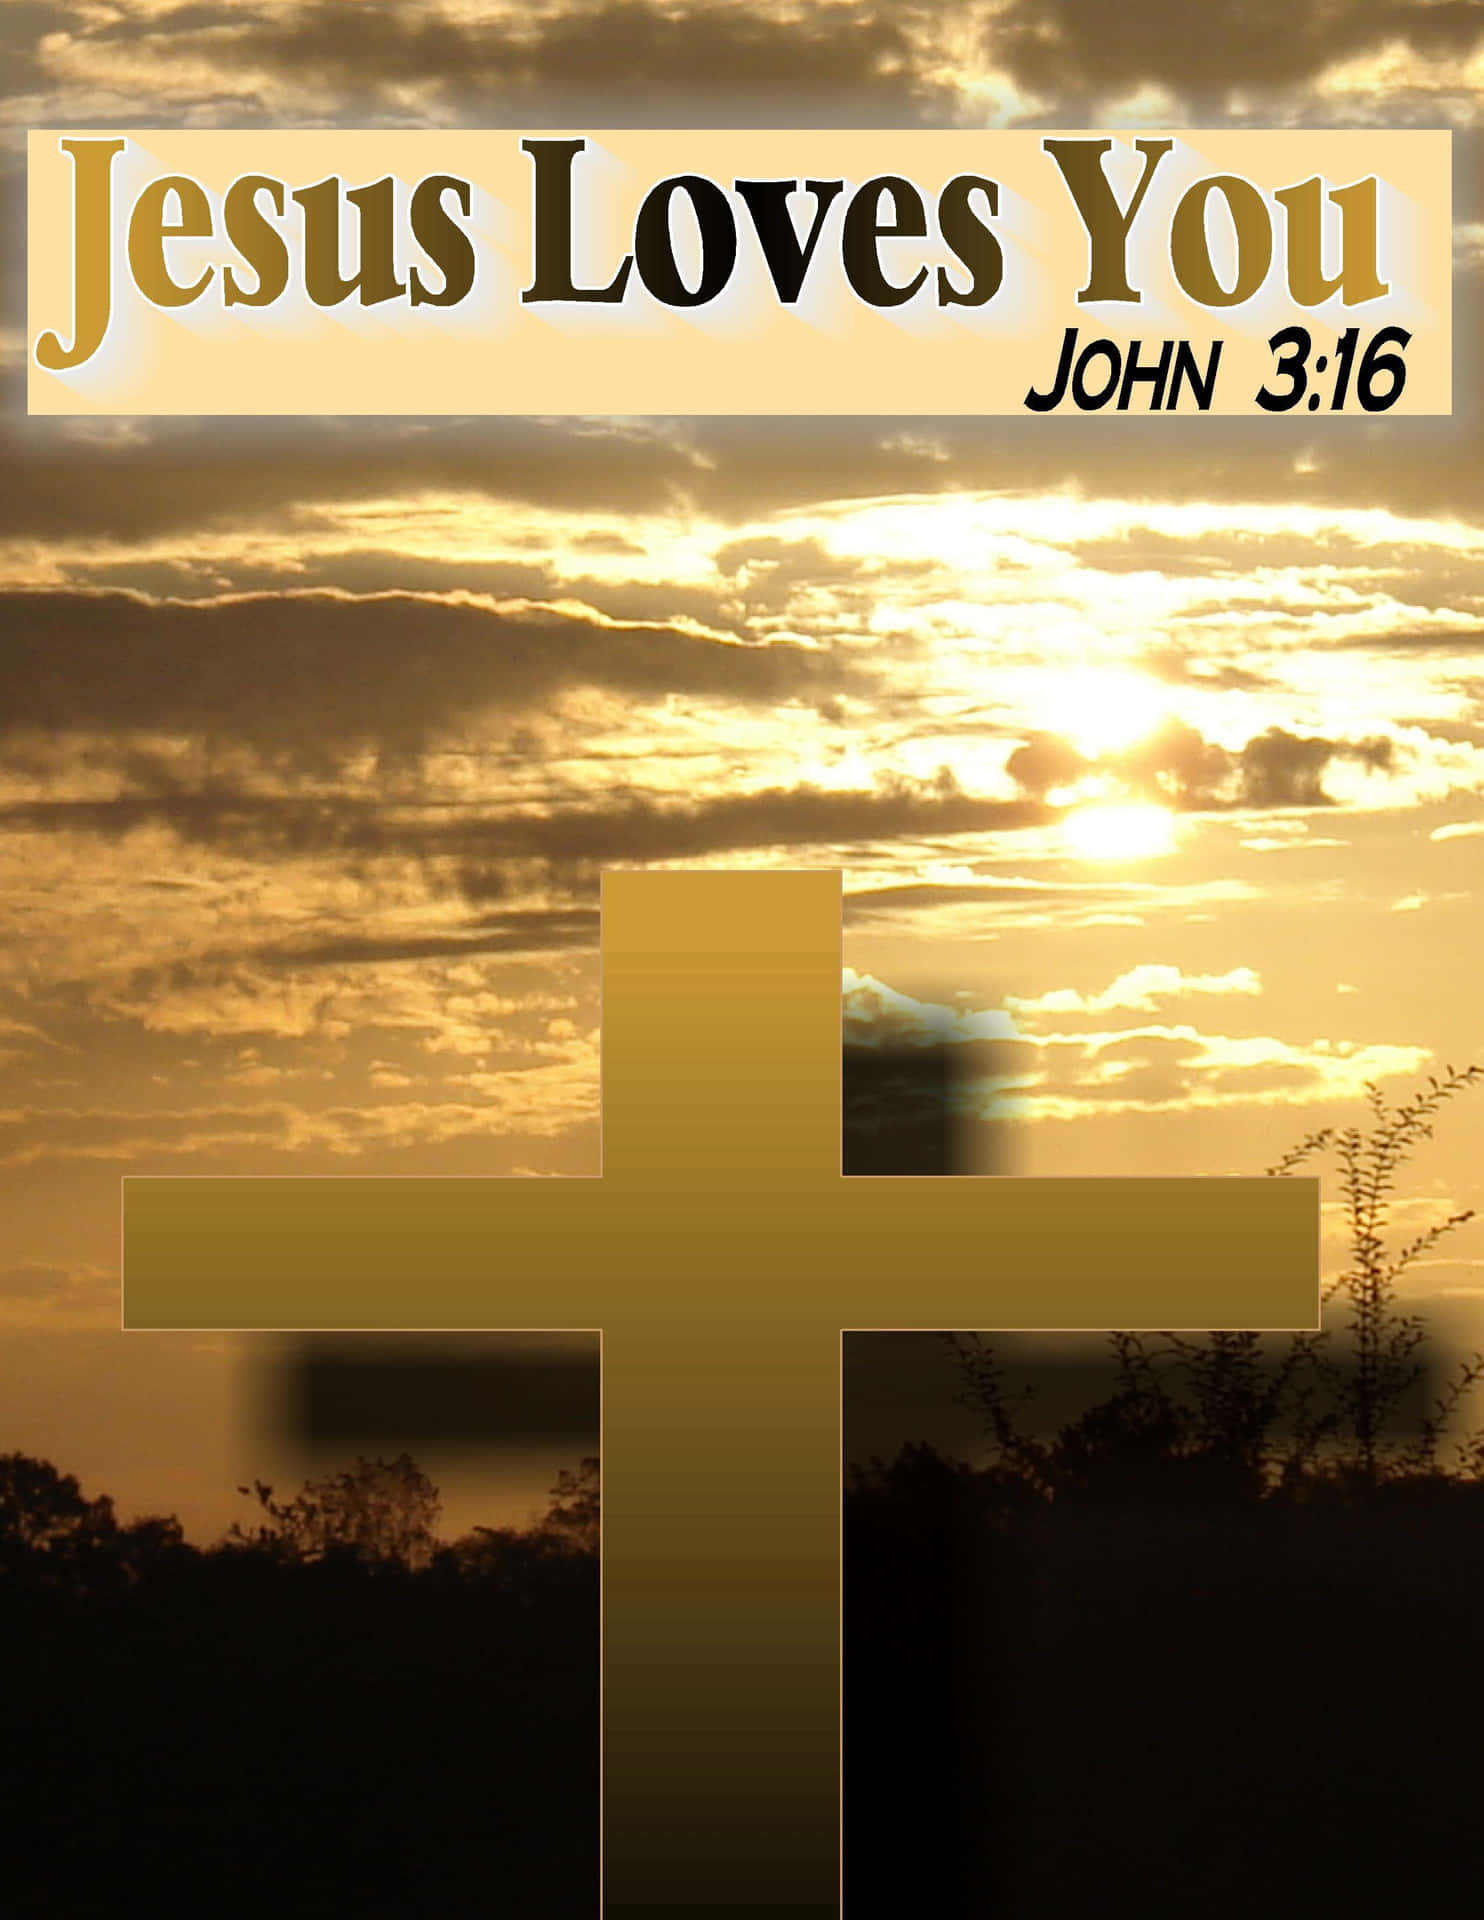 "Jesus loves you, and never forget that" Wallpaper